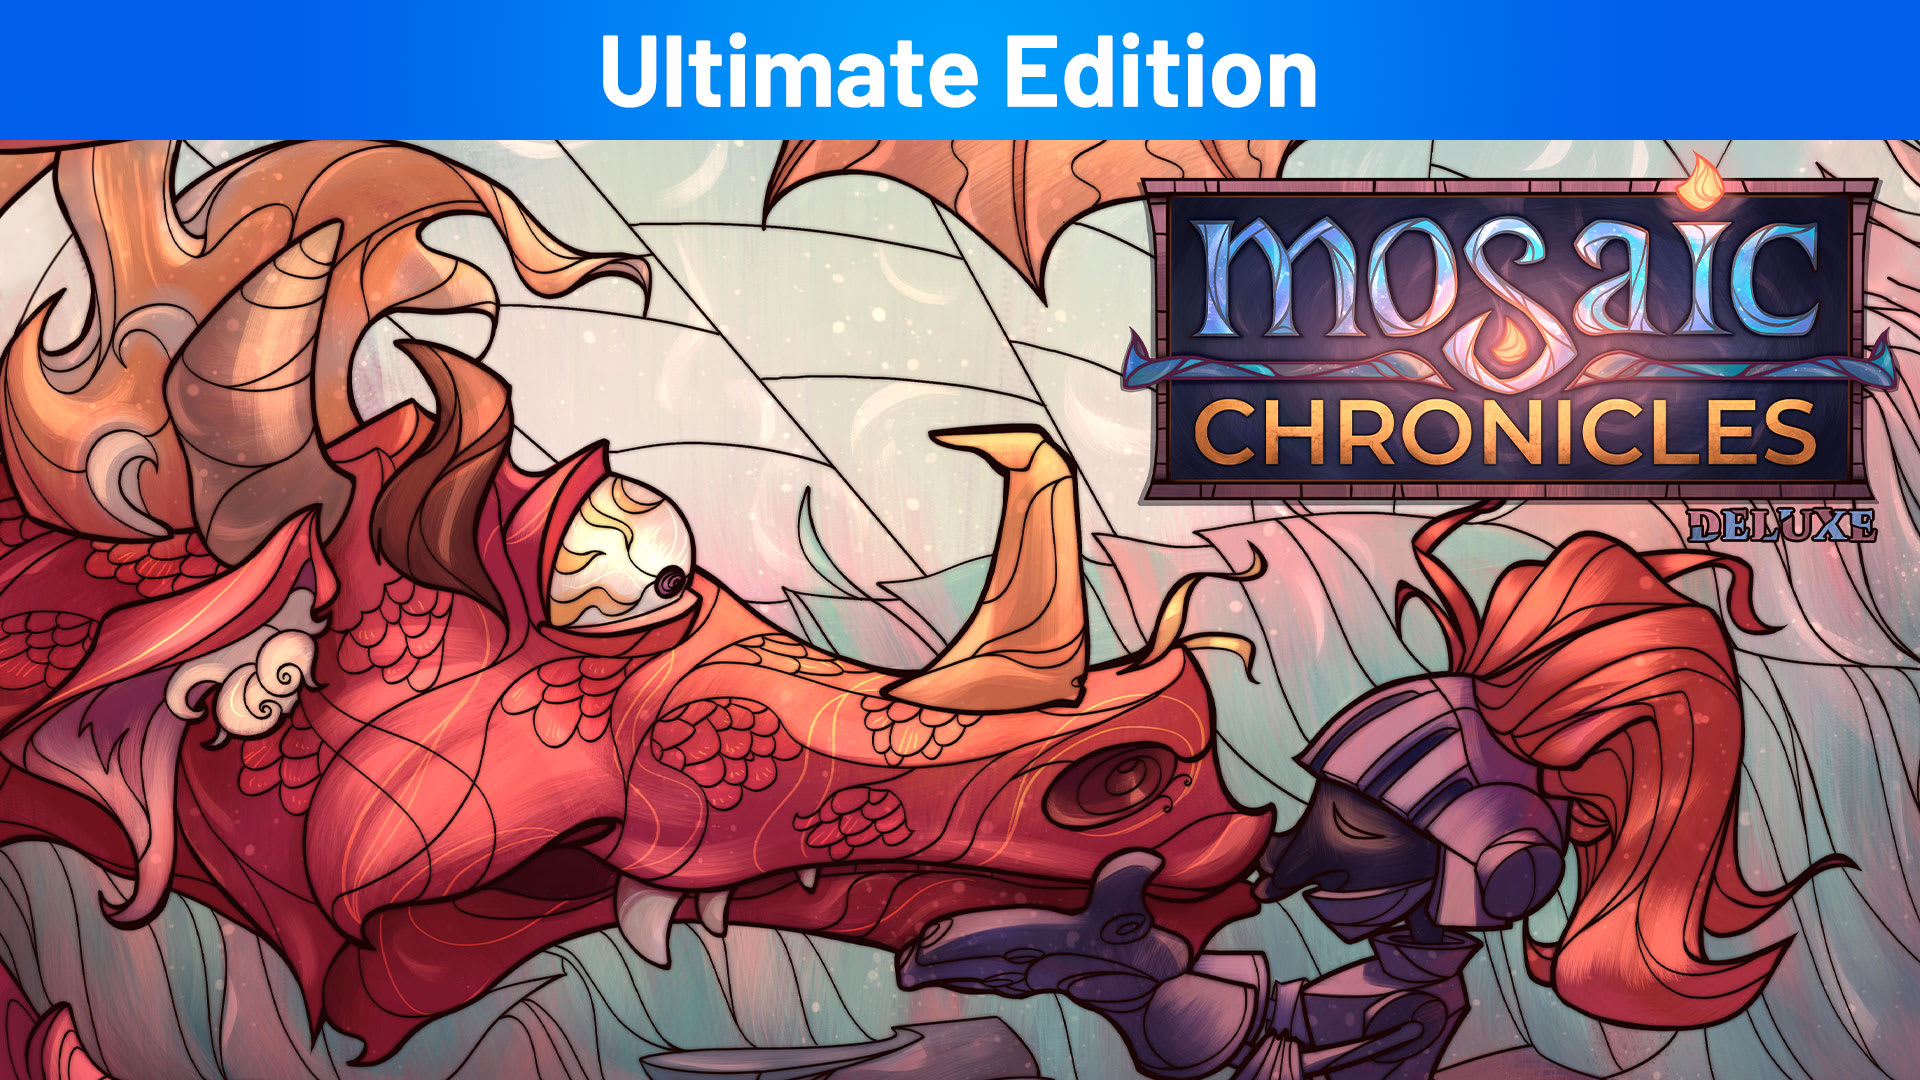 Mosaic Chronicles Deluxe Ultimate Edition